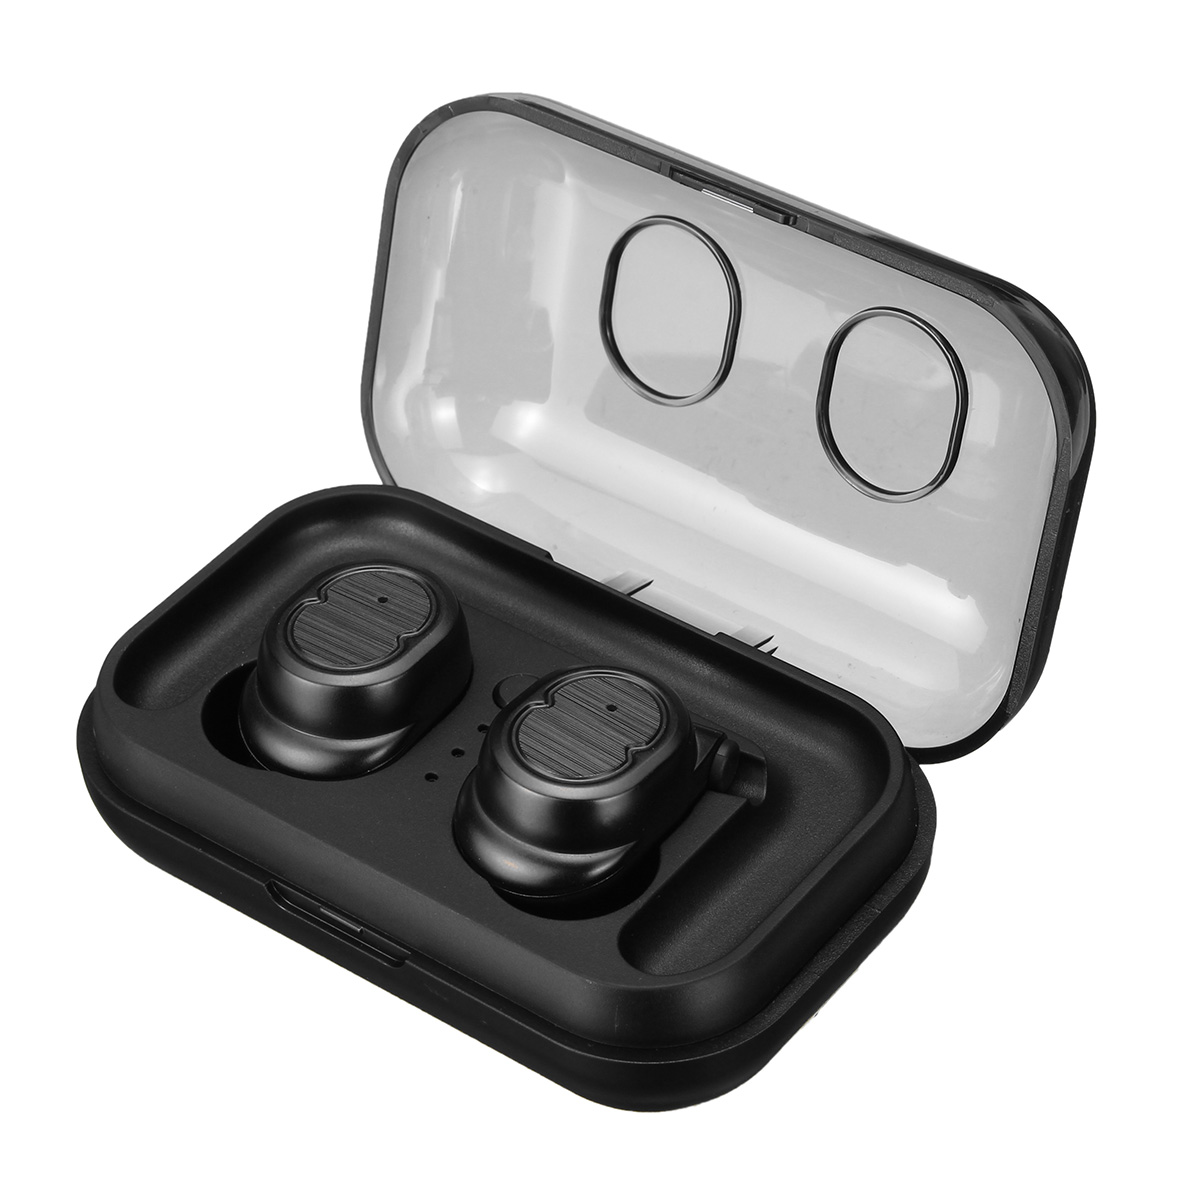 

[bluetooth 5.0] True Wireless Sport Earbuds HiFi Stereo Earphone Touch Control Auto Pairing Headphones with Mic